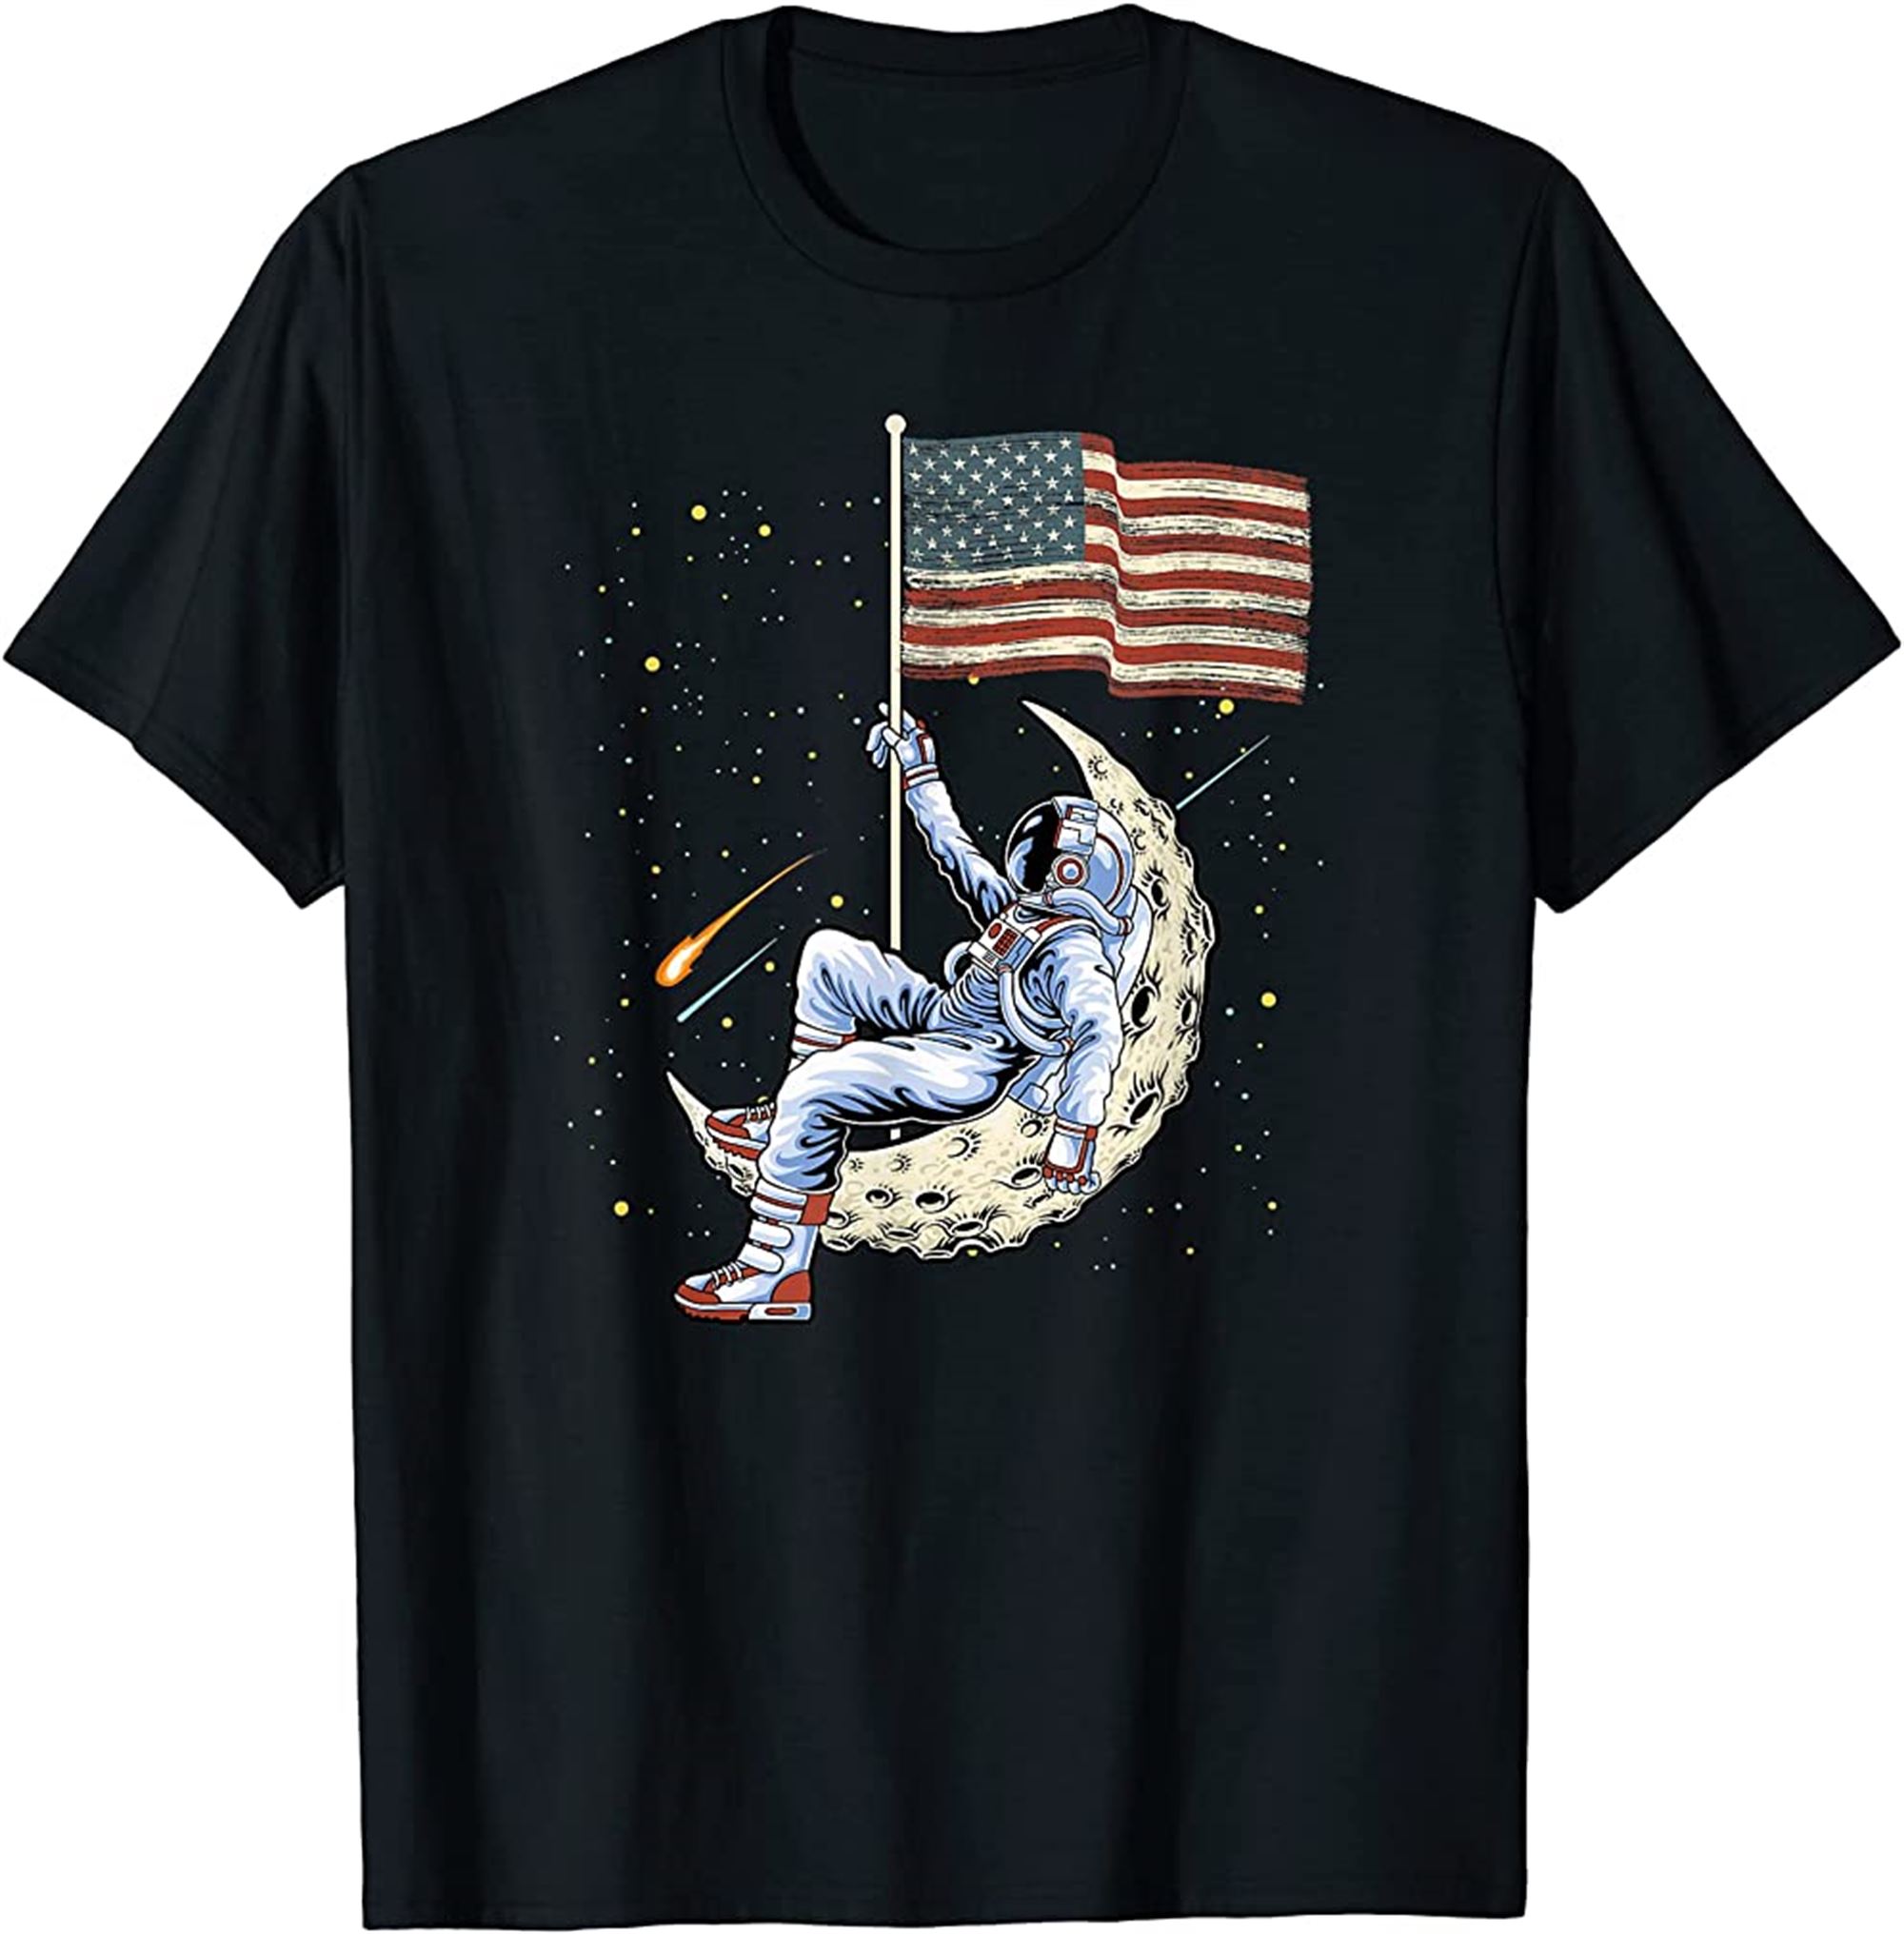 Us Flag Astronaut Space Independence Day 4th Of July T-shirt Full Size Up To 5xl